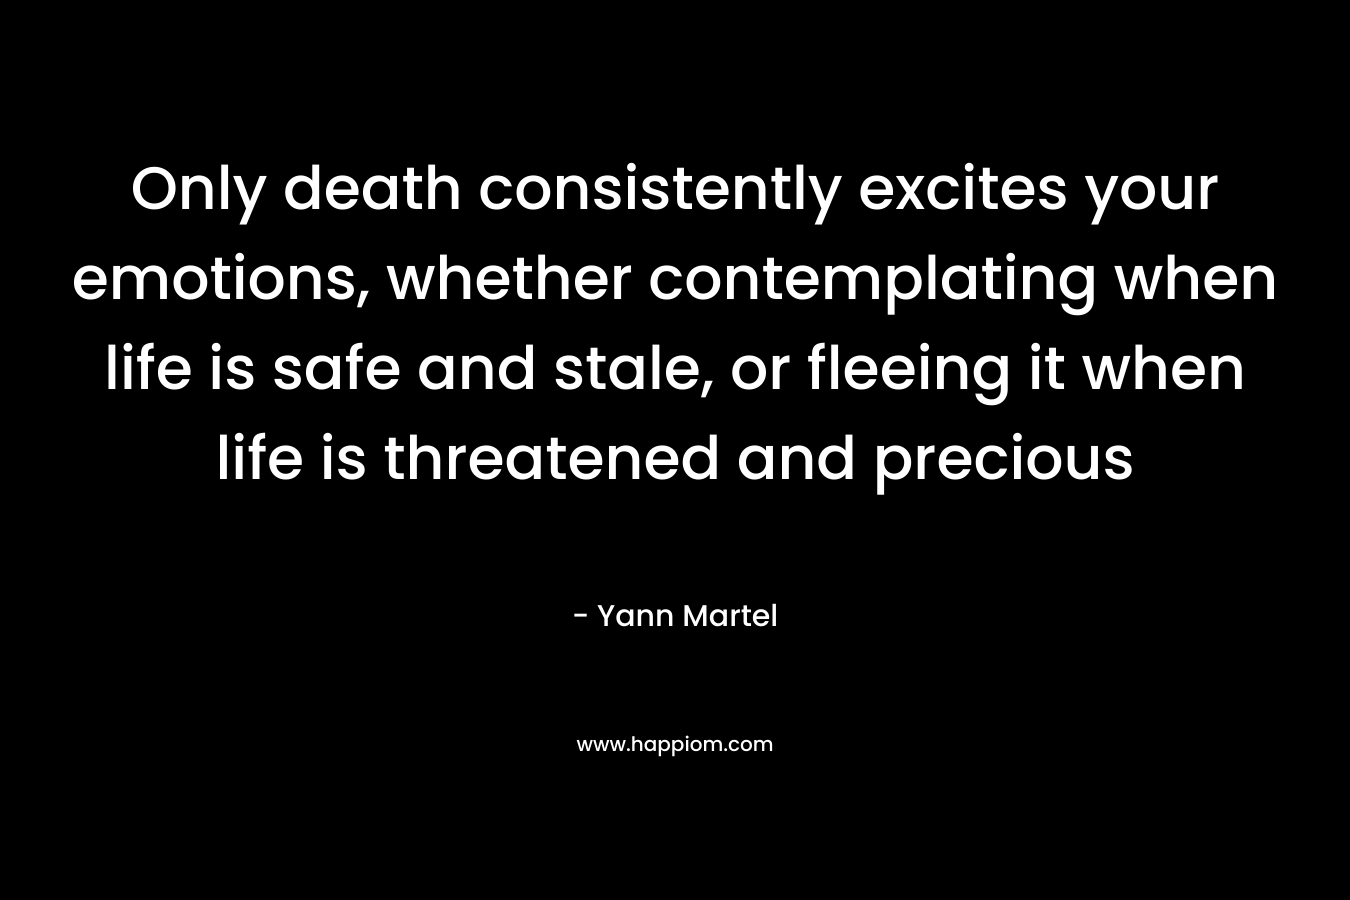 Only death consistently excites your emotions, whether contemplating when life is safe and stale, or fleeing it when life is threatened and precious – Yann Martel